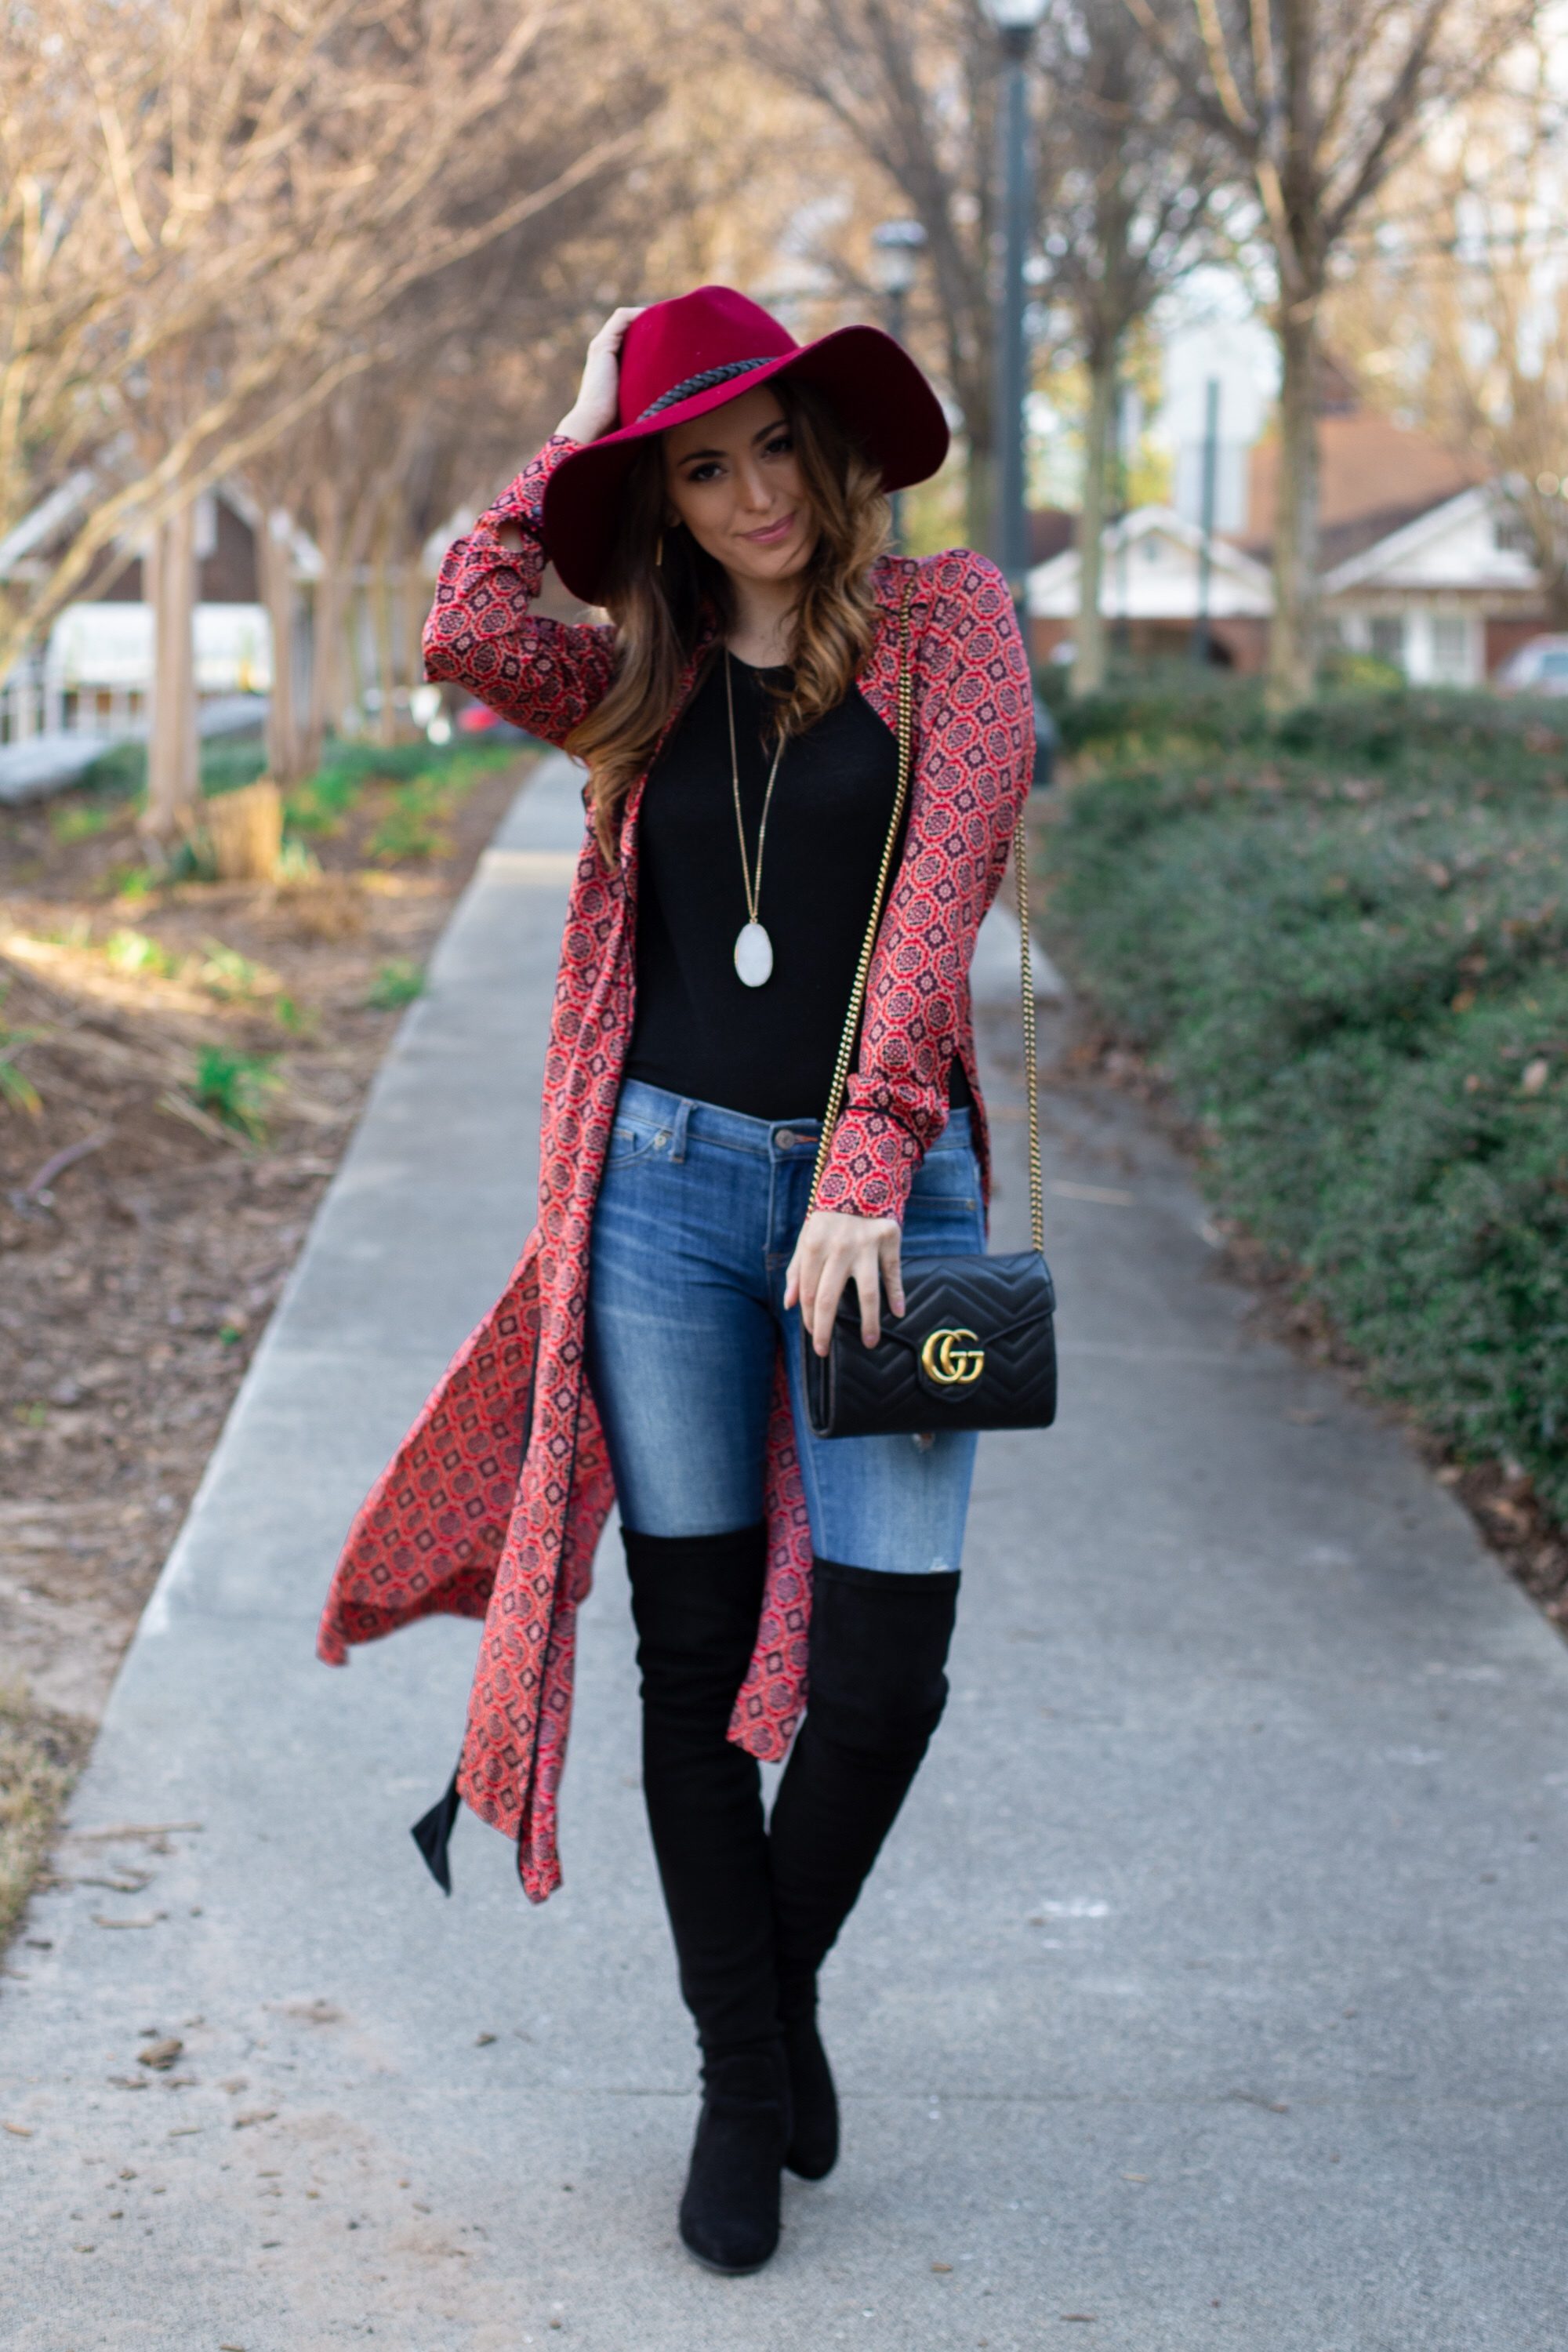 Free People Dawn To Dusk Printed Maxi Top, how to wear a kimono in the winter, sunday brunch at gypsy kitchen, sunday funday, what to do in Atlanta, how to wear red, boho style, how to wear over the knee boots, how to wear a floppy wool hat, wide brim fedora